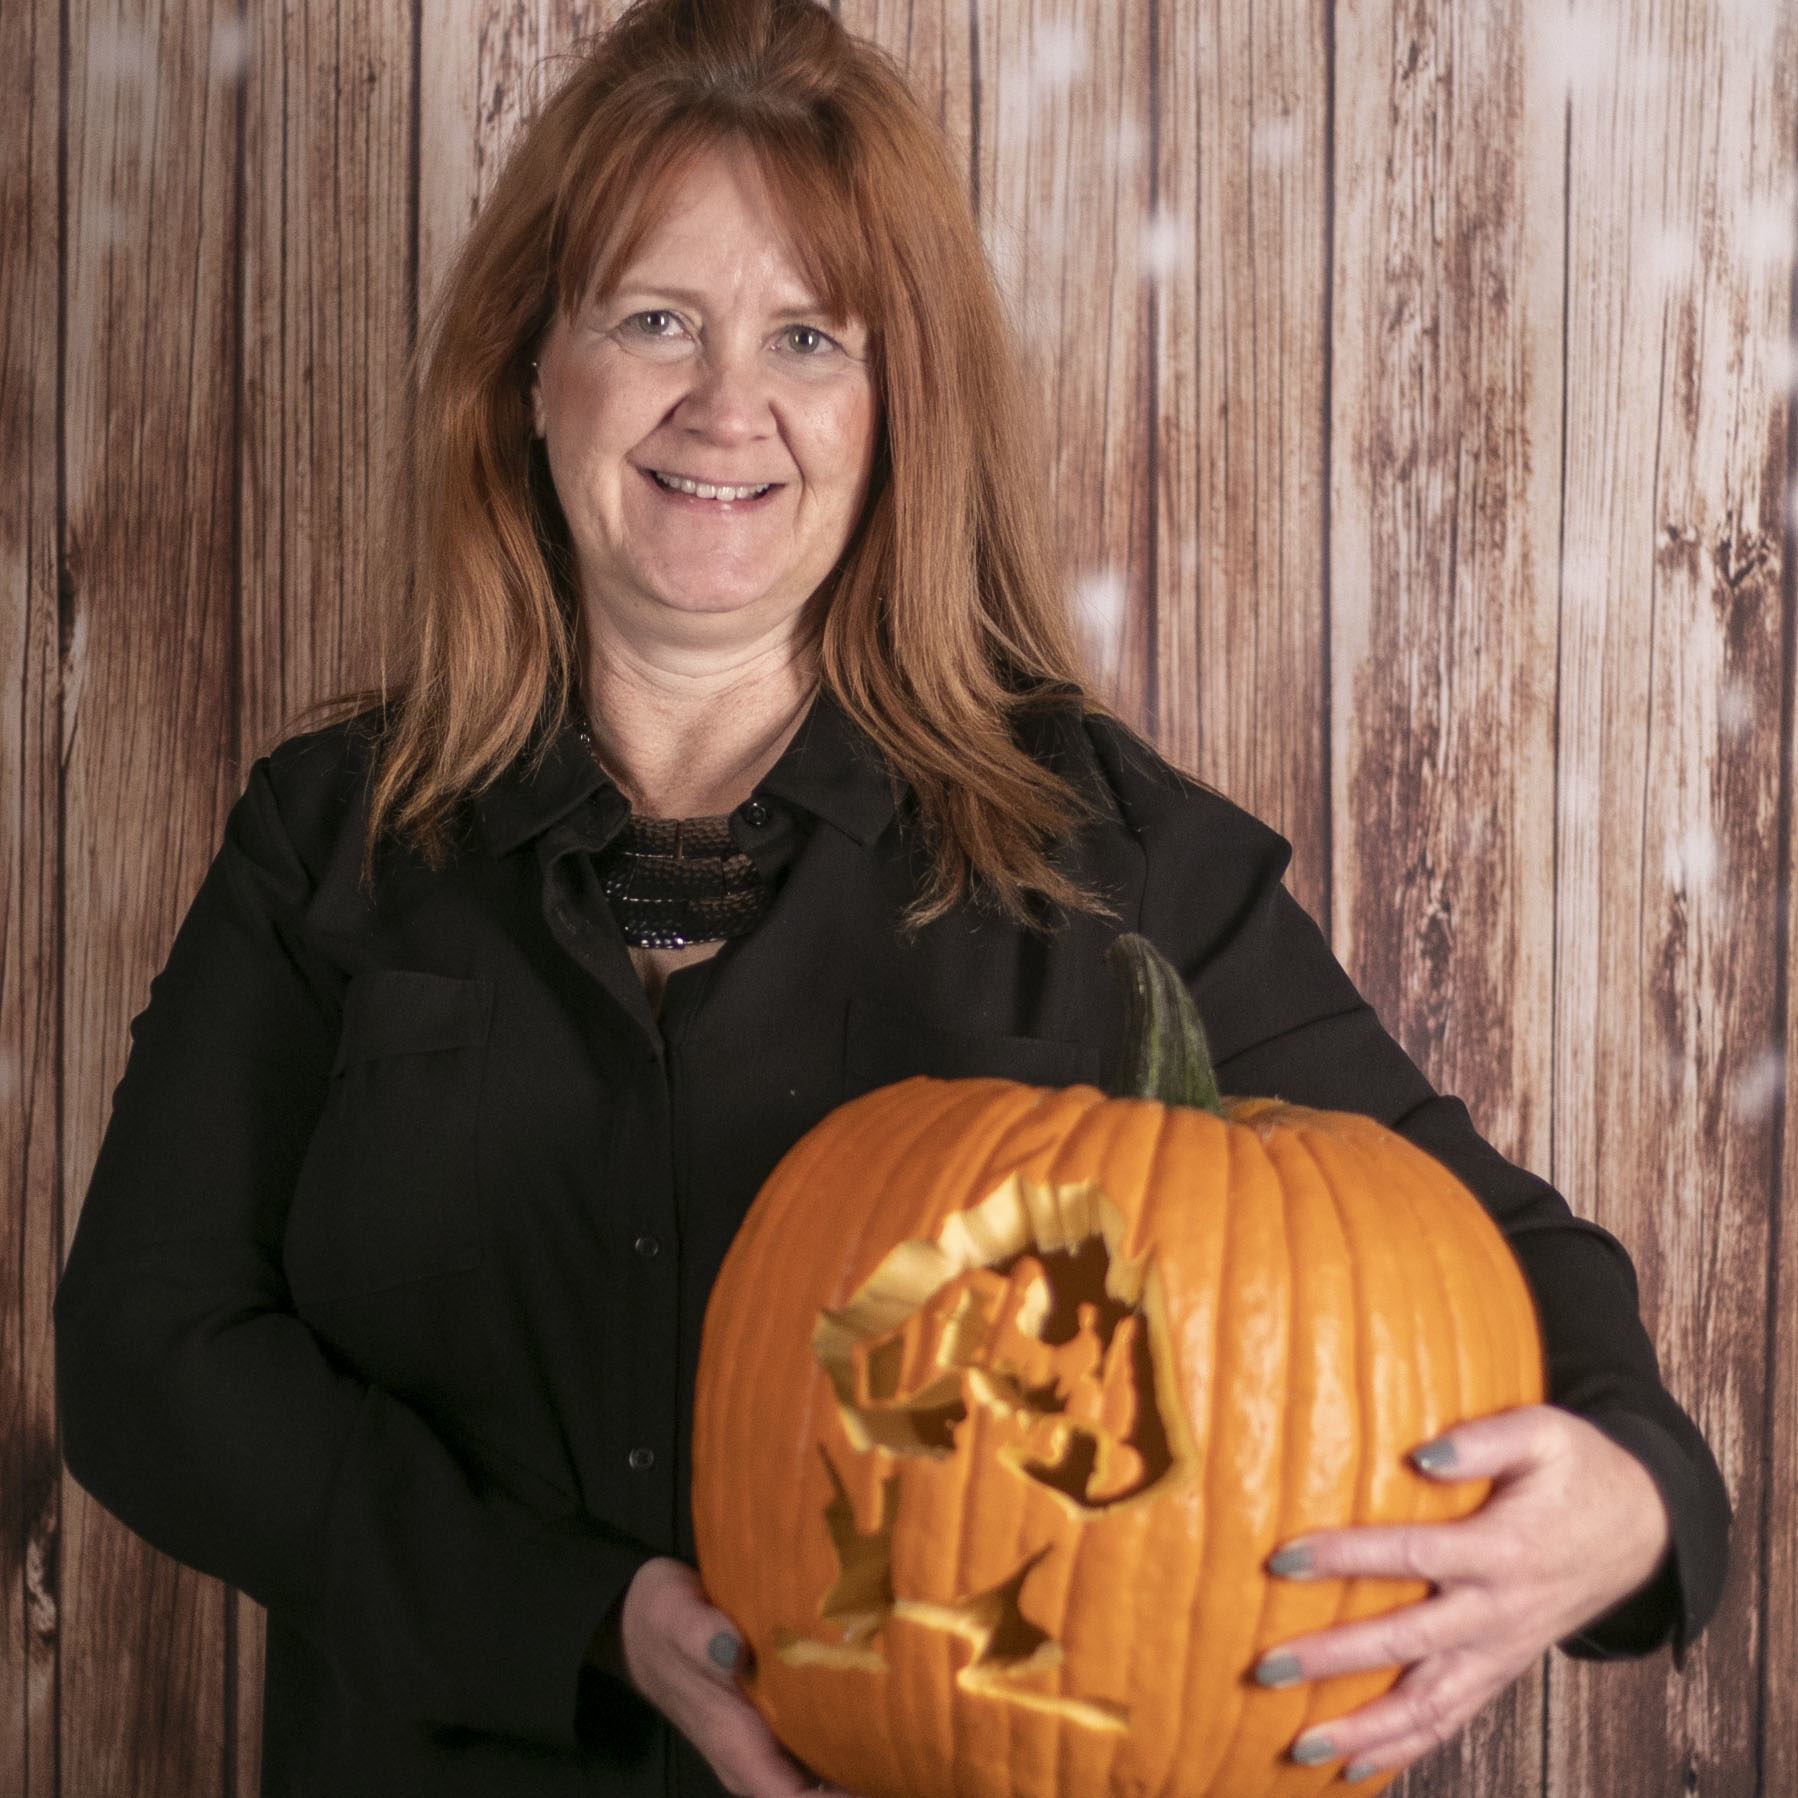 Newco Halloween 2019 second place winner of pumpkin carving contest